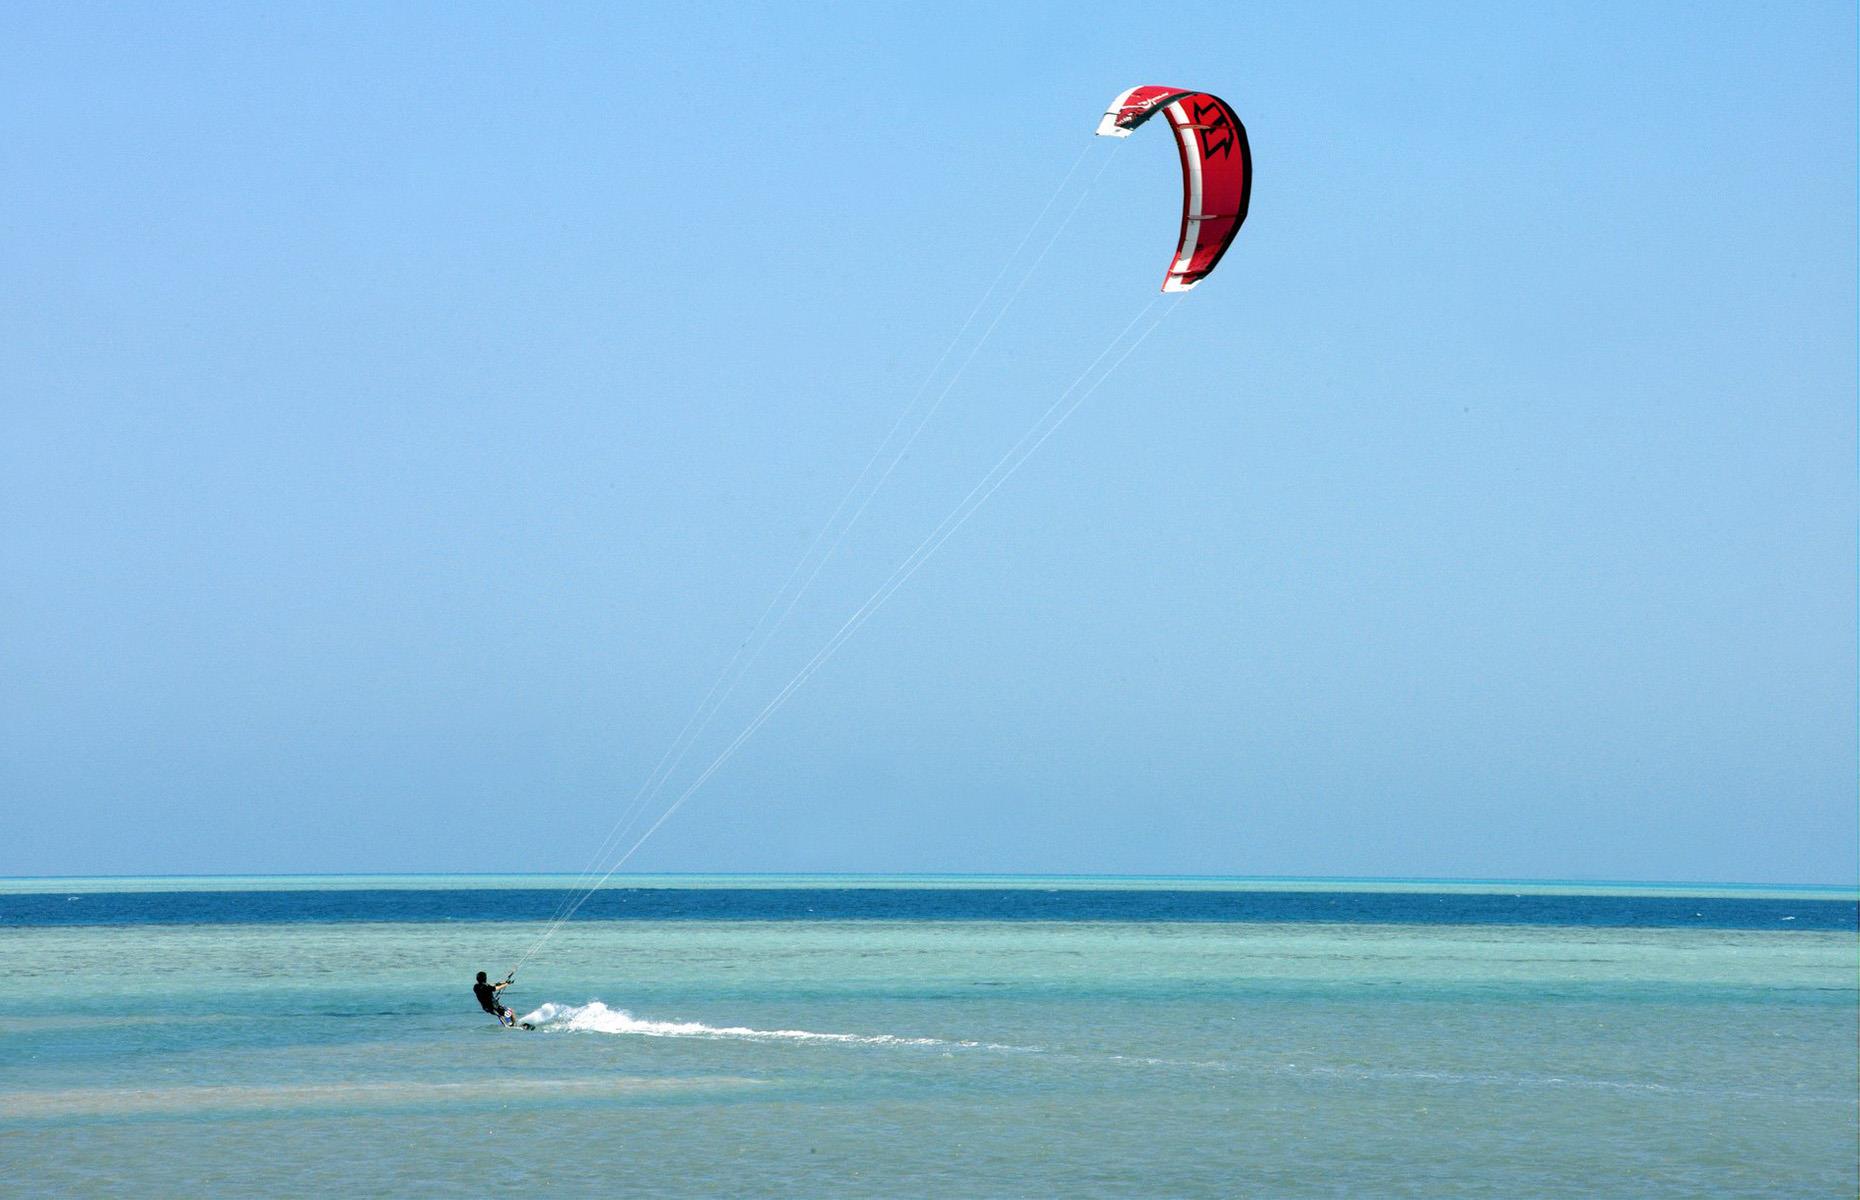 <p>Many coastal areas attract kitesurfers, but the conditions in El Gouna – with just enough wind to power the kite, yet relatively flat waters to allow the board to glide smoothly – are perfect. You need to register with a kitesurfing center, whether you’re a beginner or a pro – try Kite El Gouna on Mangroovy Beach, which is considered one of the best spots here for kitesurfing and other wind-powered watersports like parasailing.</p>